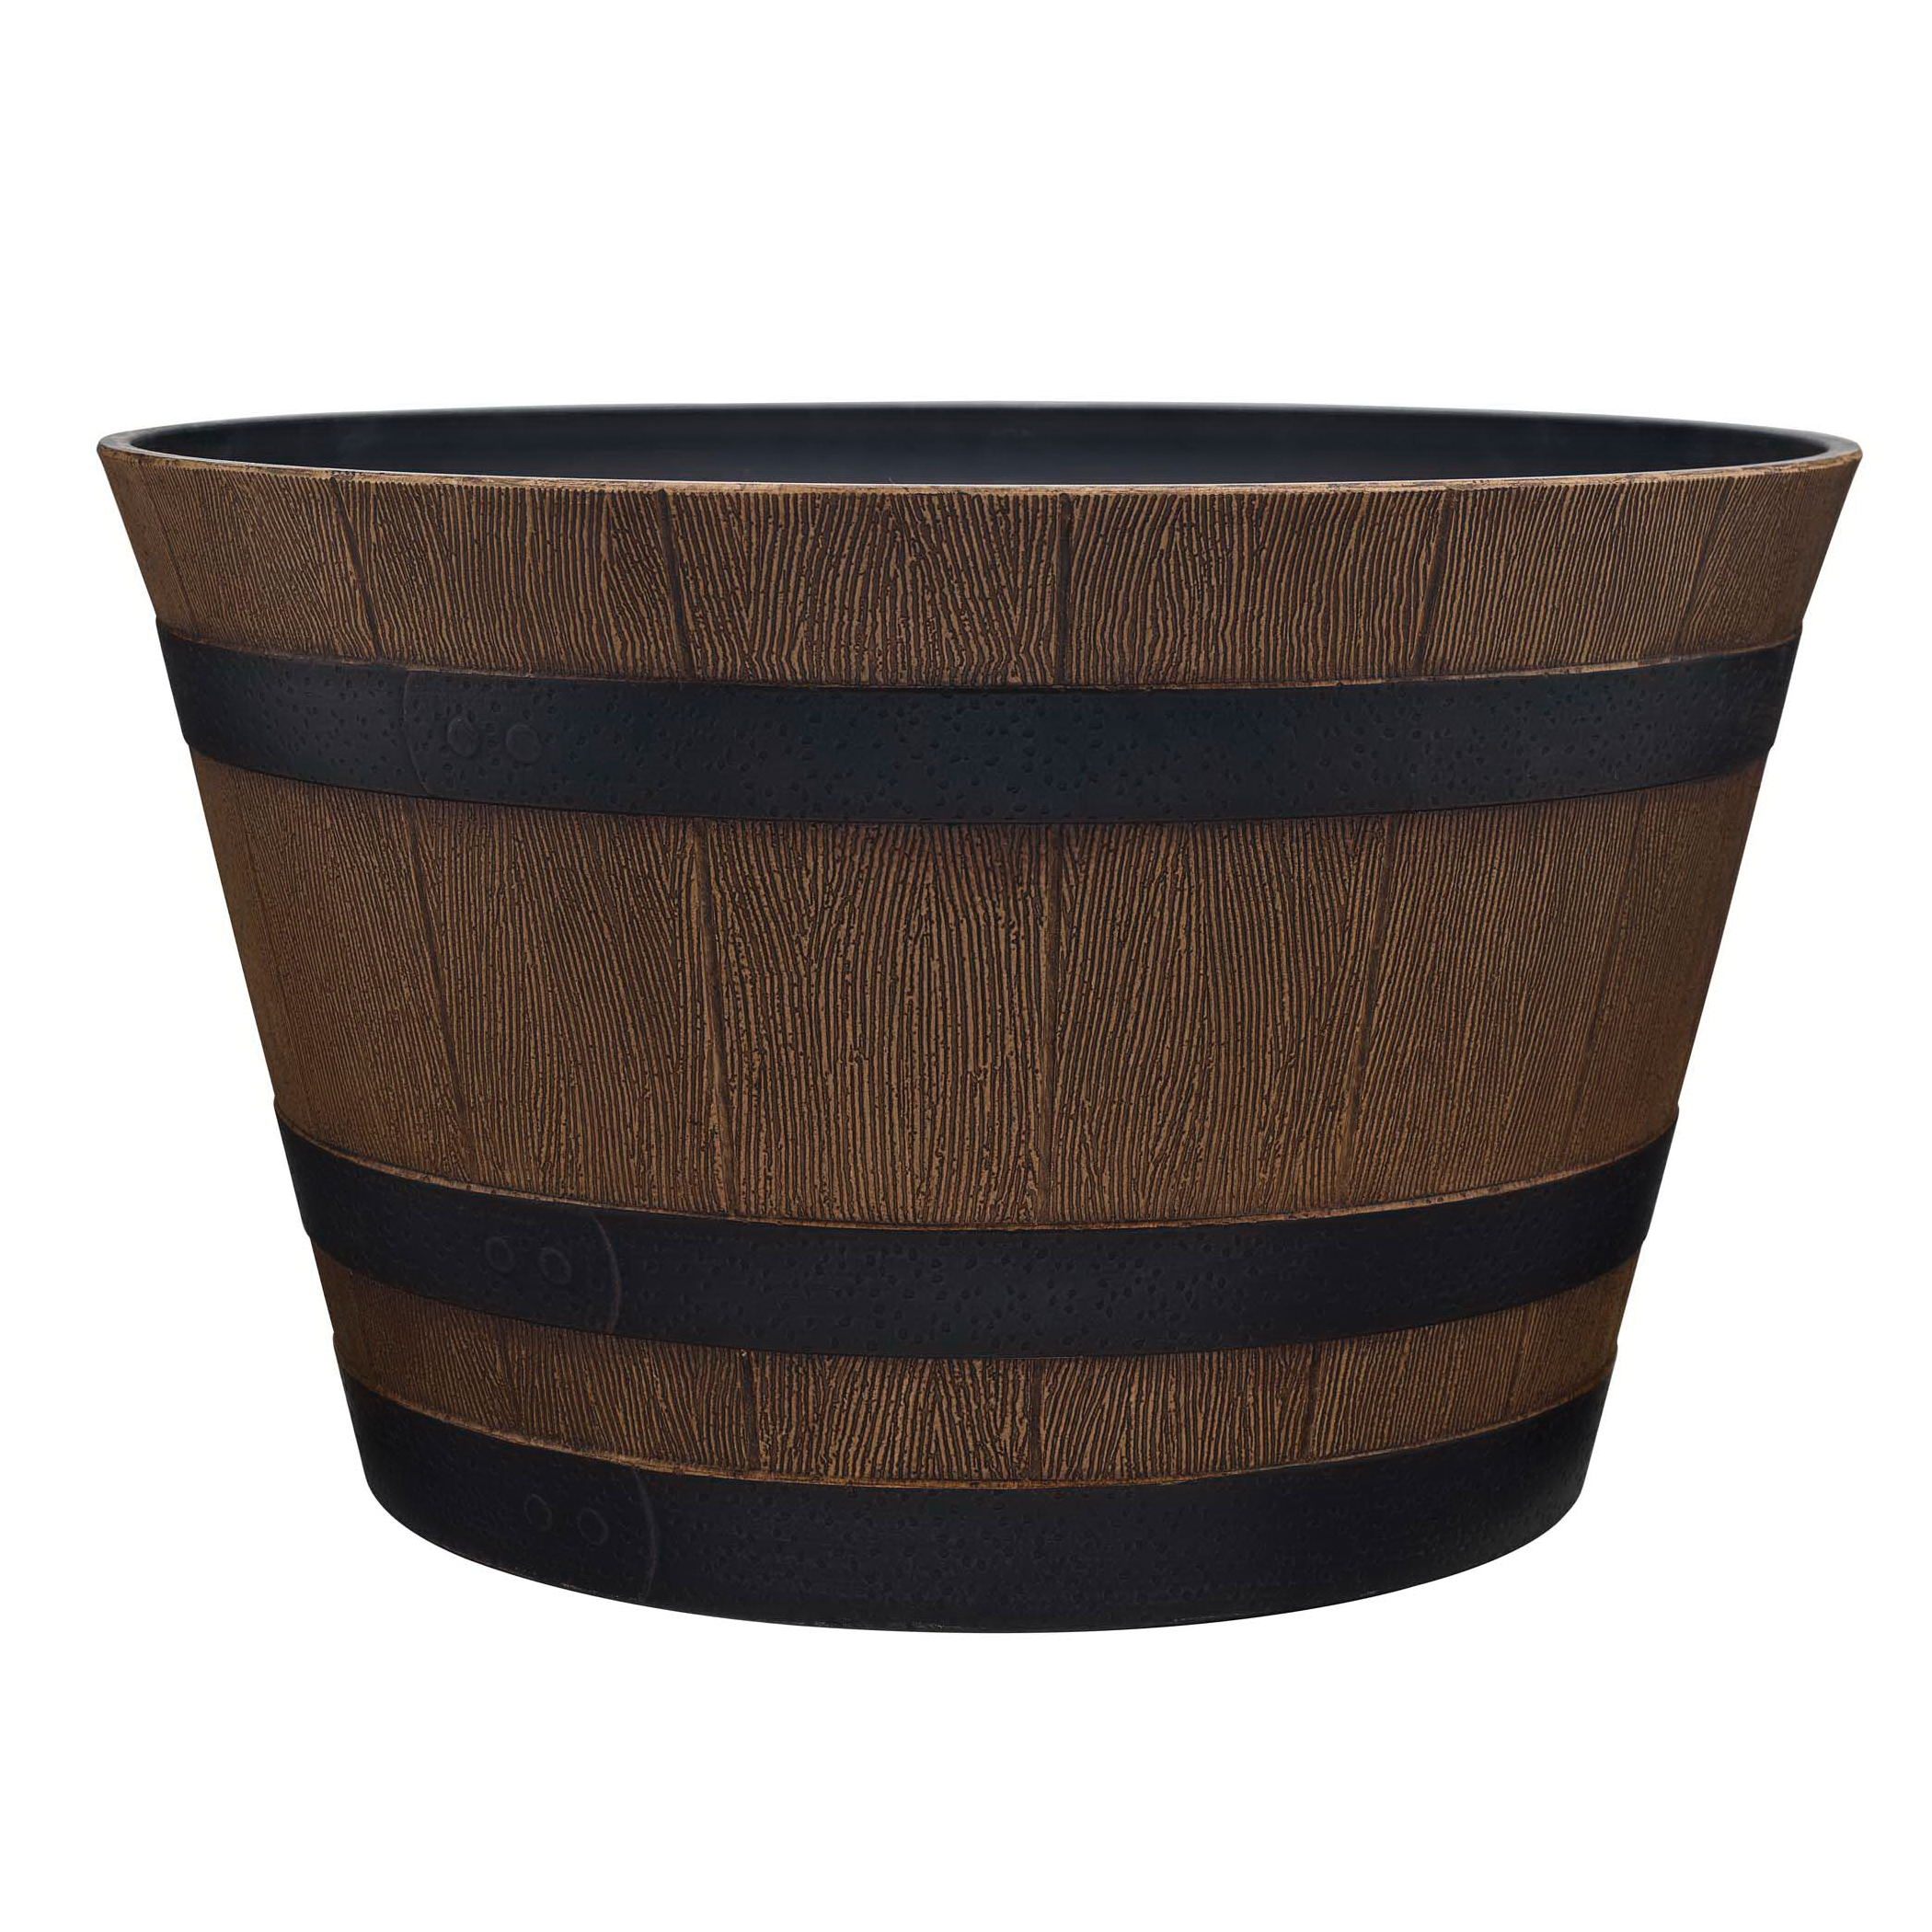 HDR-055440 Planter, 15.4 in H, 15.4 in W, 9.1 in D, Round, Whiskey Barrel Design, Plastic, Natural Oak